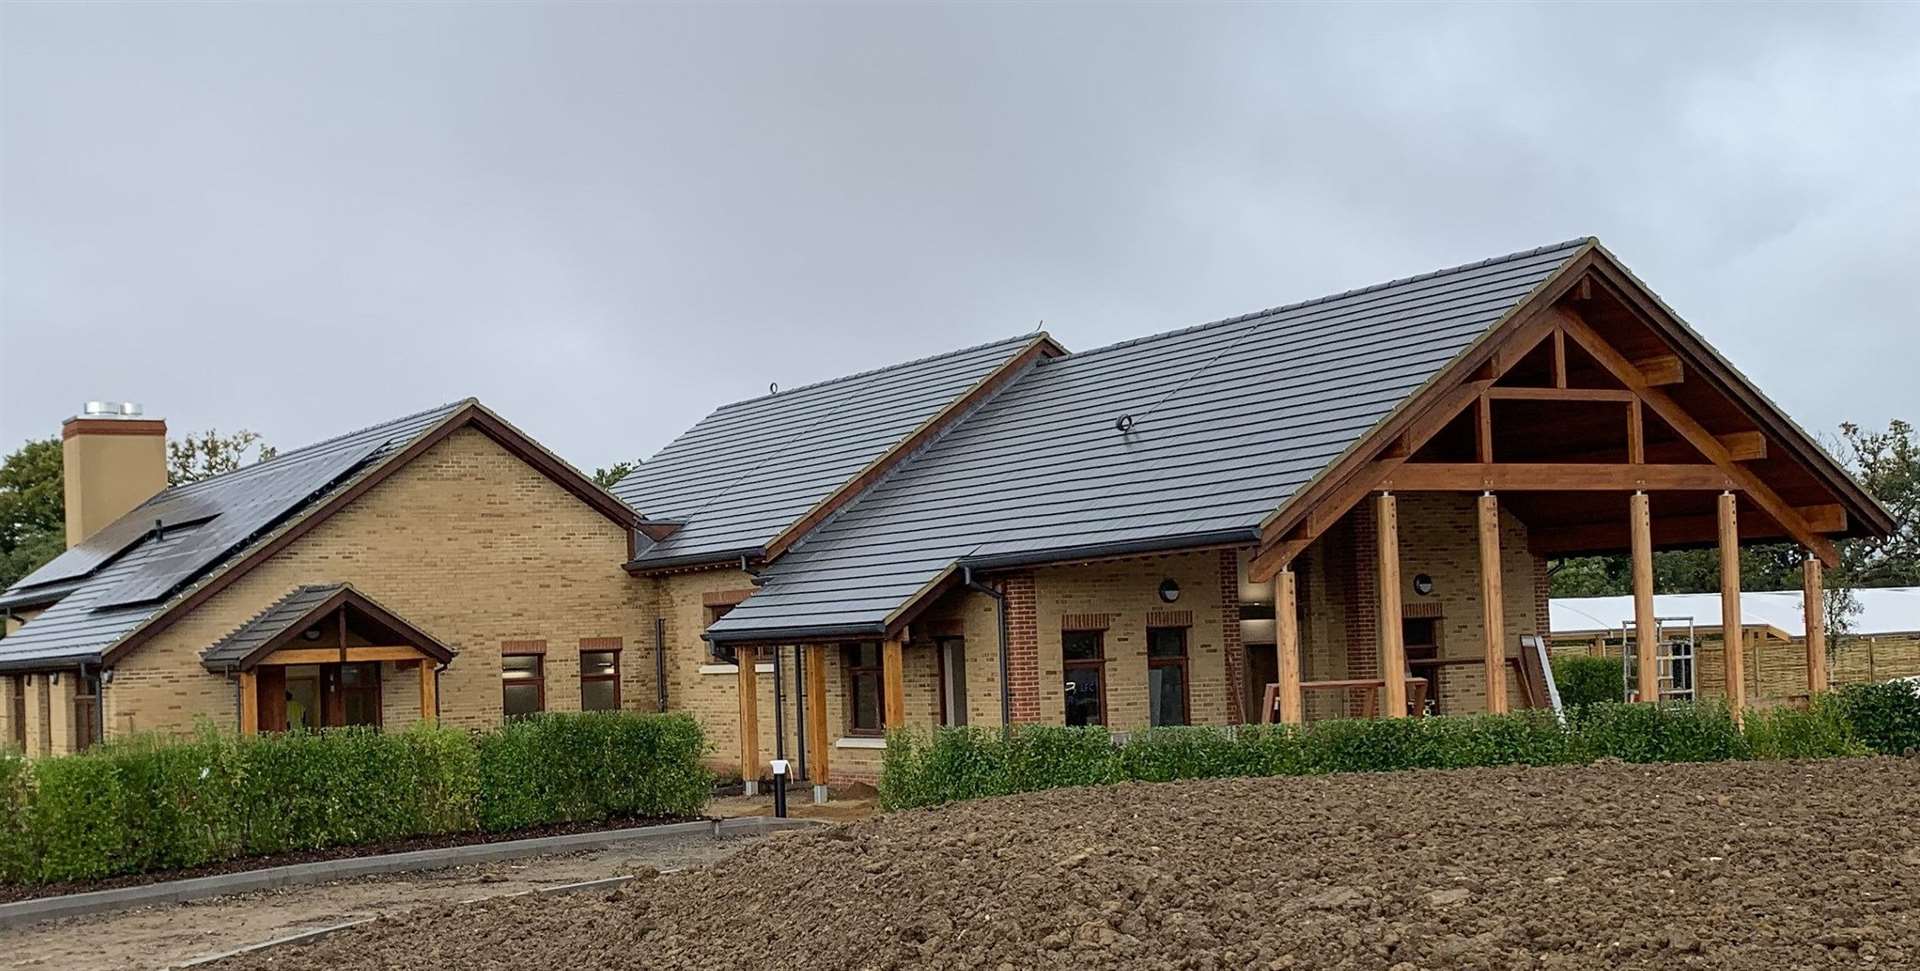 Herne Bay Crematorium, in Bullockstone Road will open in November. Picture: Westerleigh Group